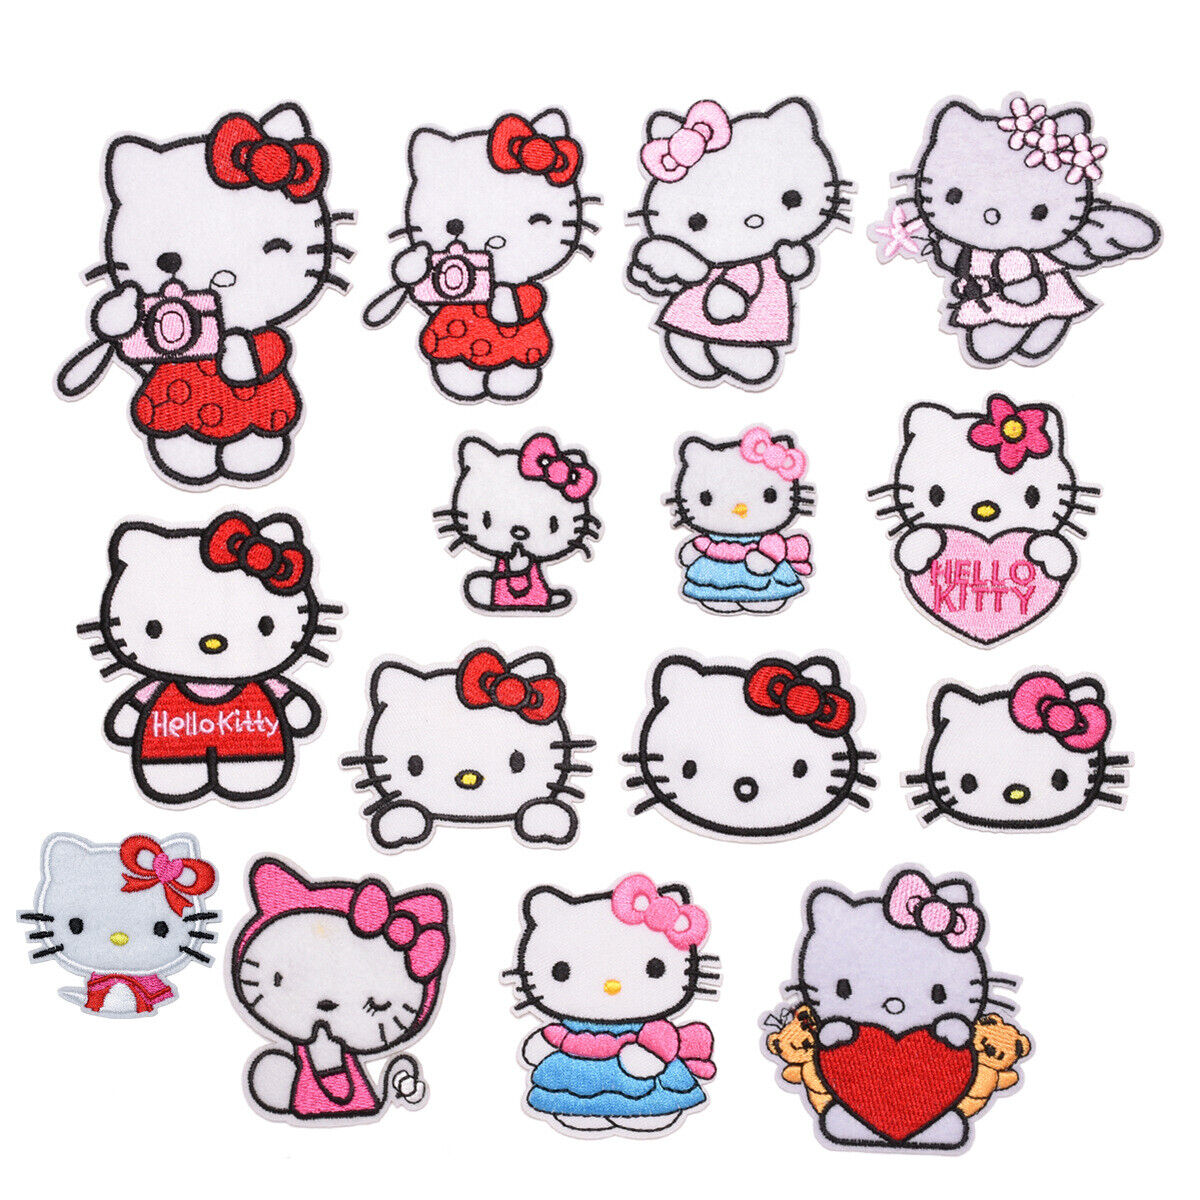 15pcs/set Cute Hello Kitty Embroidery Patch Costume Accessories Iron On Sew On